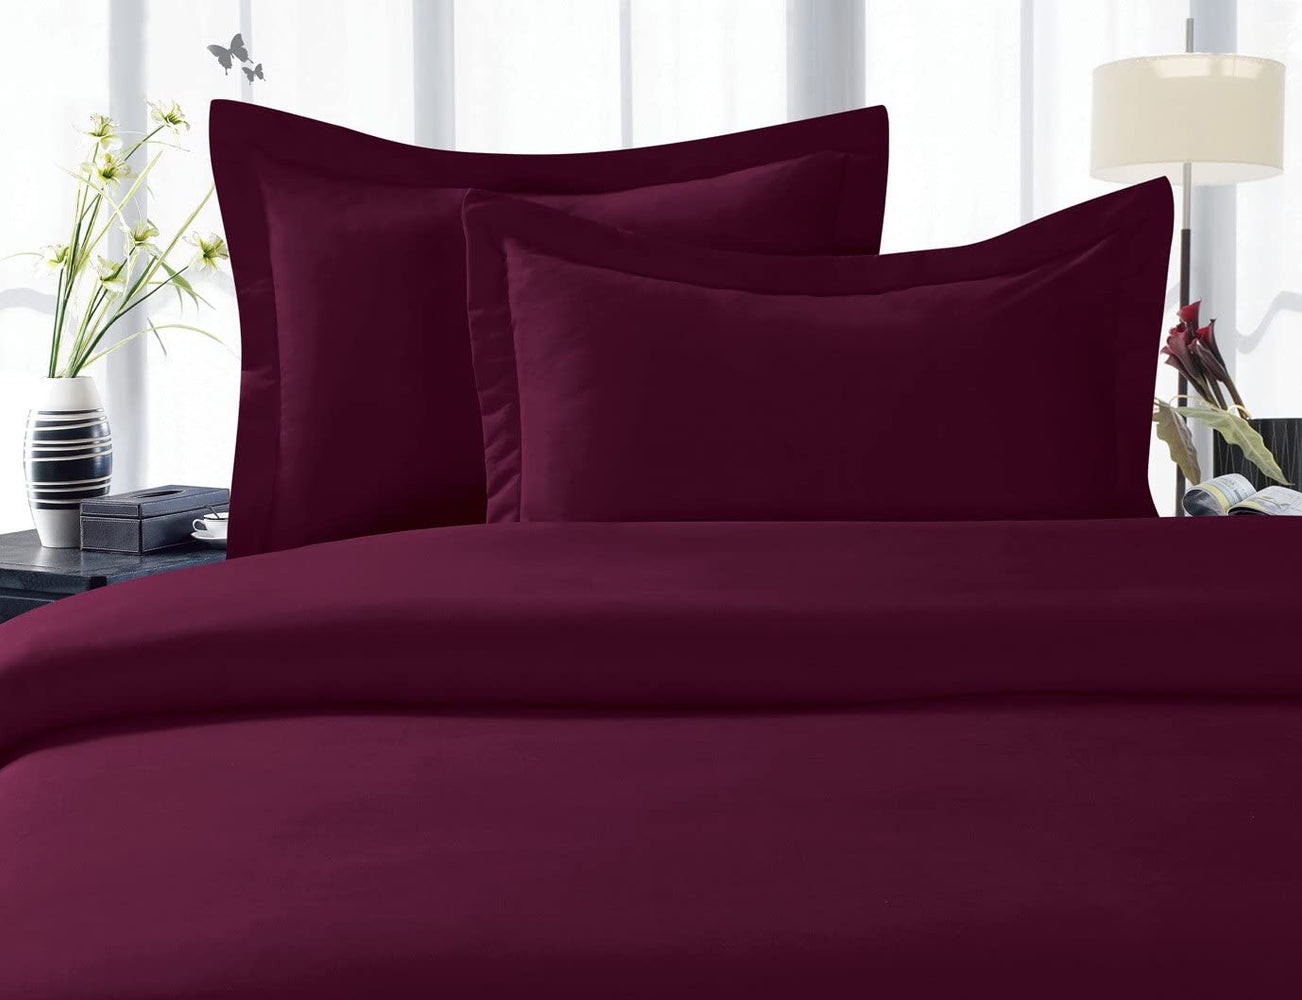 Elegant Comfort 1500 Thread Count Egyptian Quality 3 Piece Wrinkle Free and Fade Resistant Luxurious Duvet Cover Set, Full/Queen, Eggplant Purple